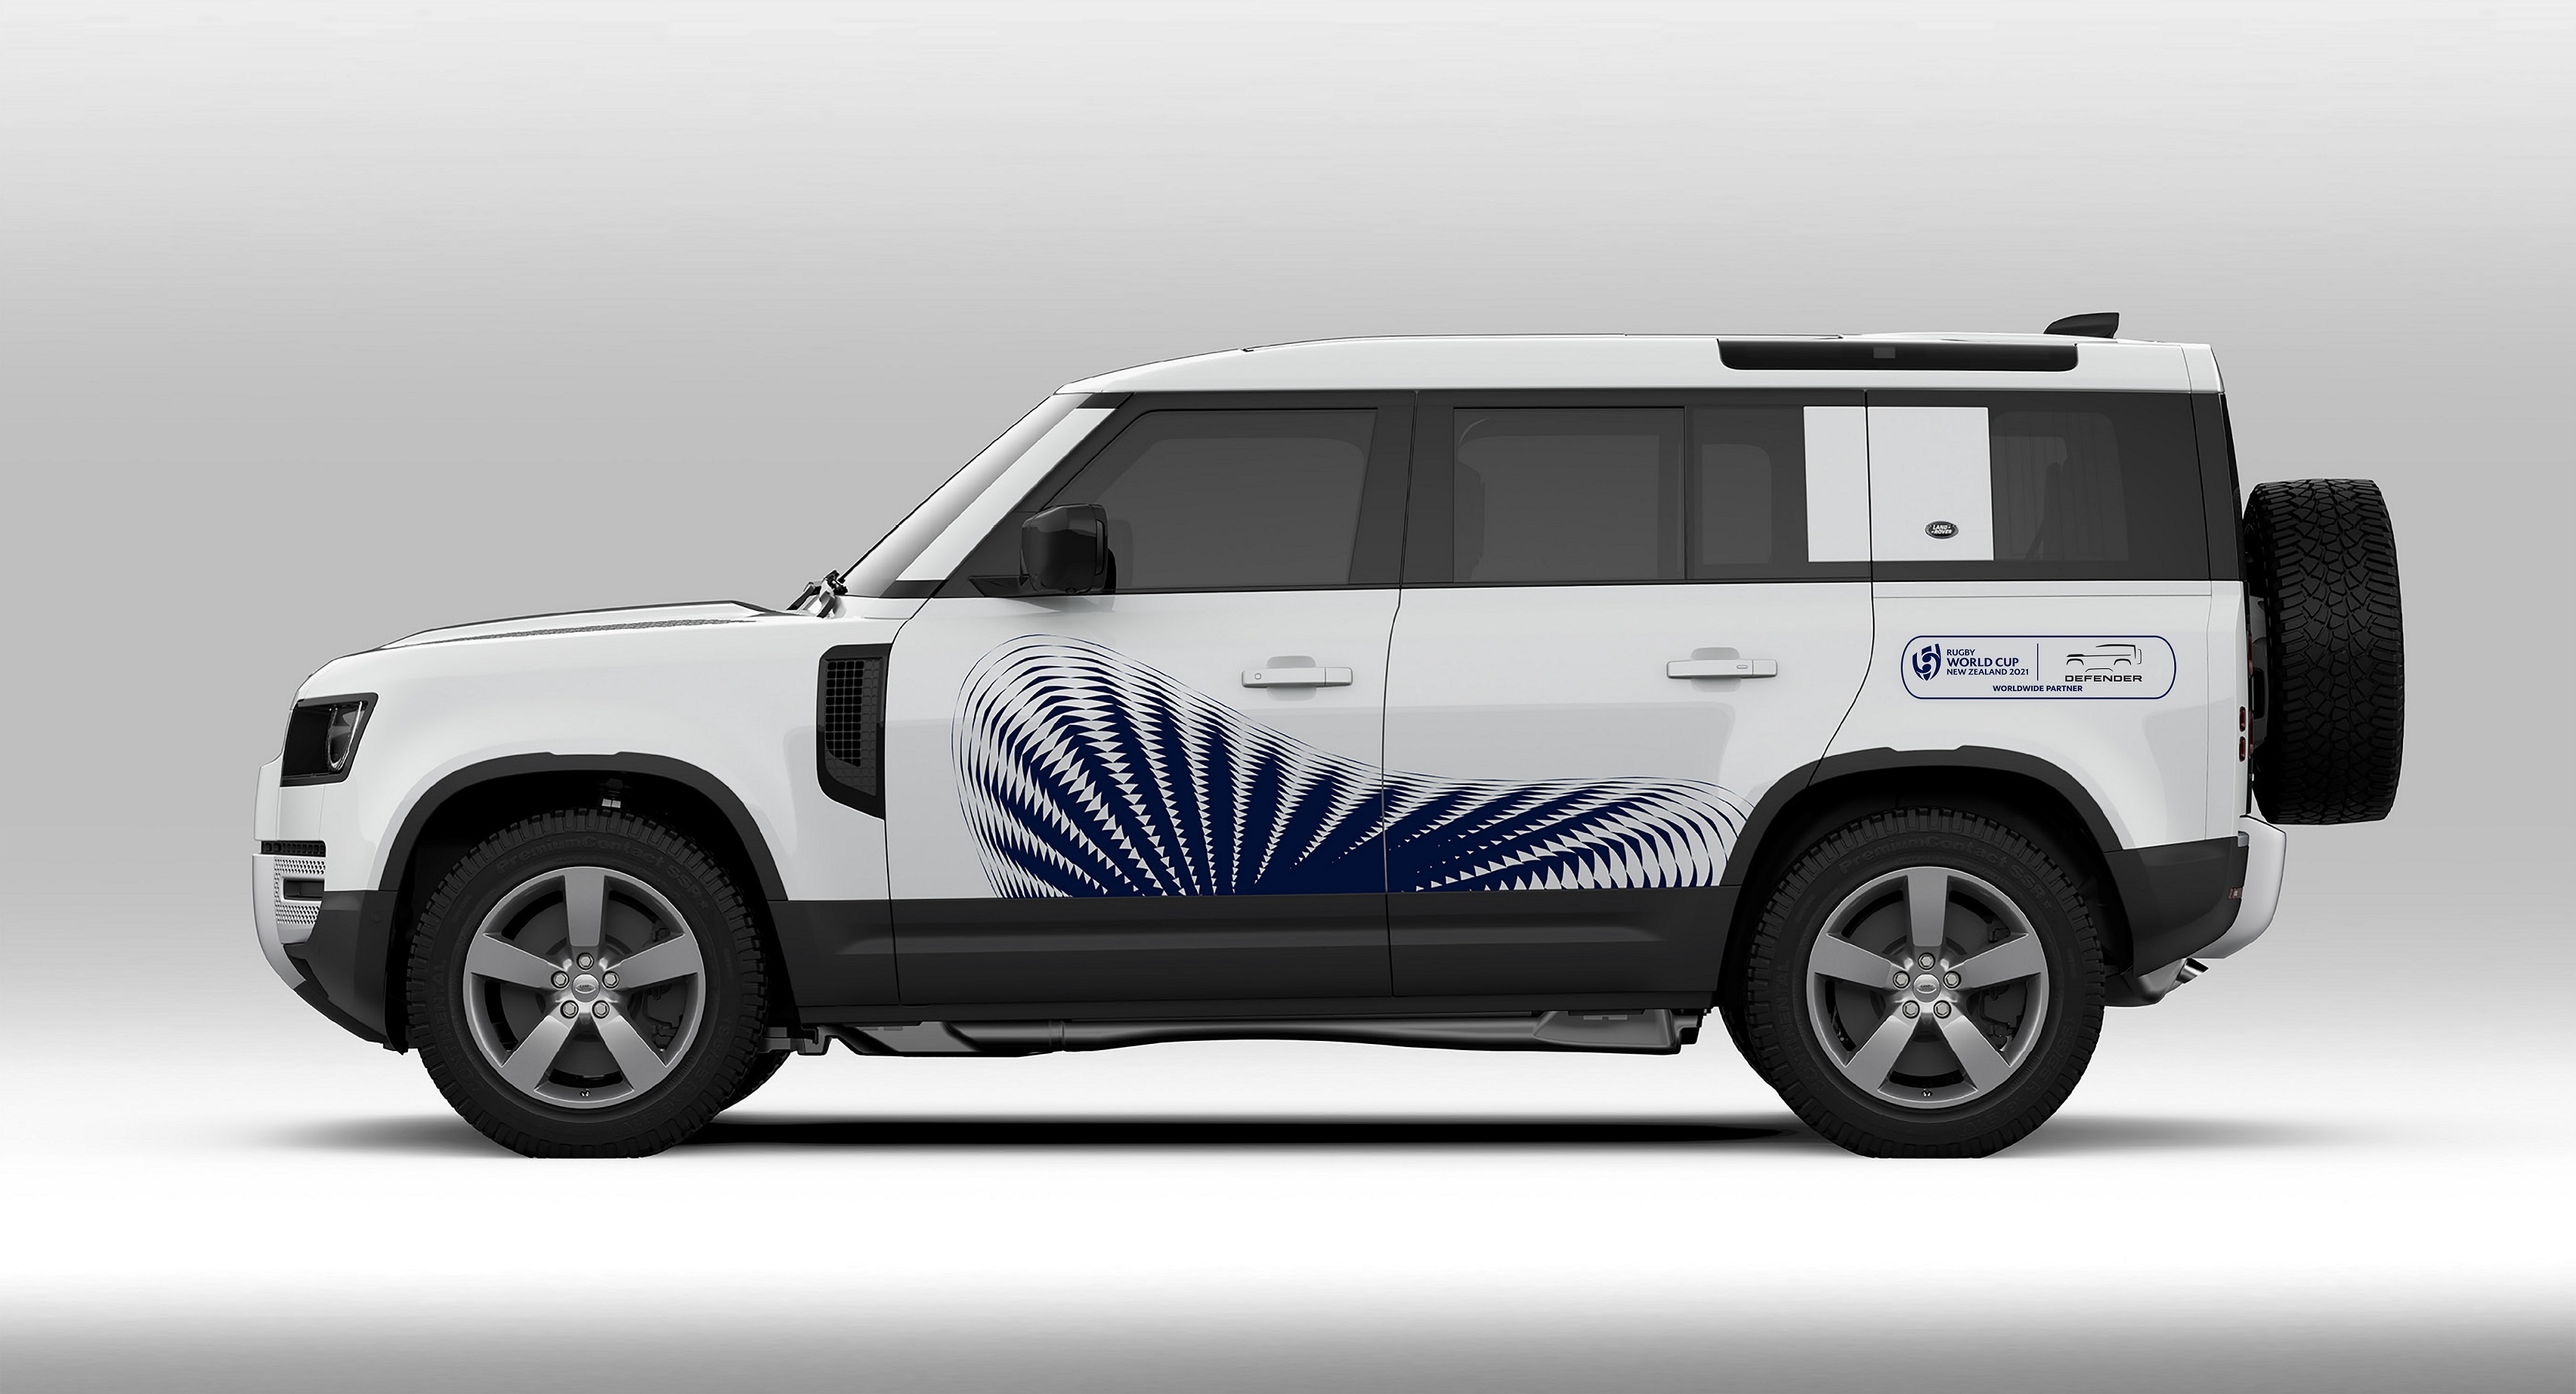 The new defender announced as worldwide partner  of women’s rugby world cup in New Zealand